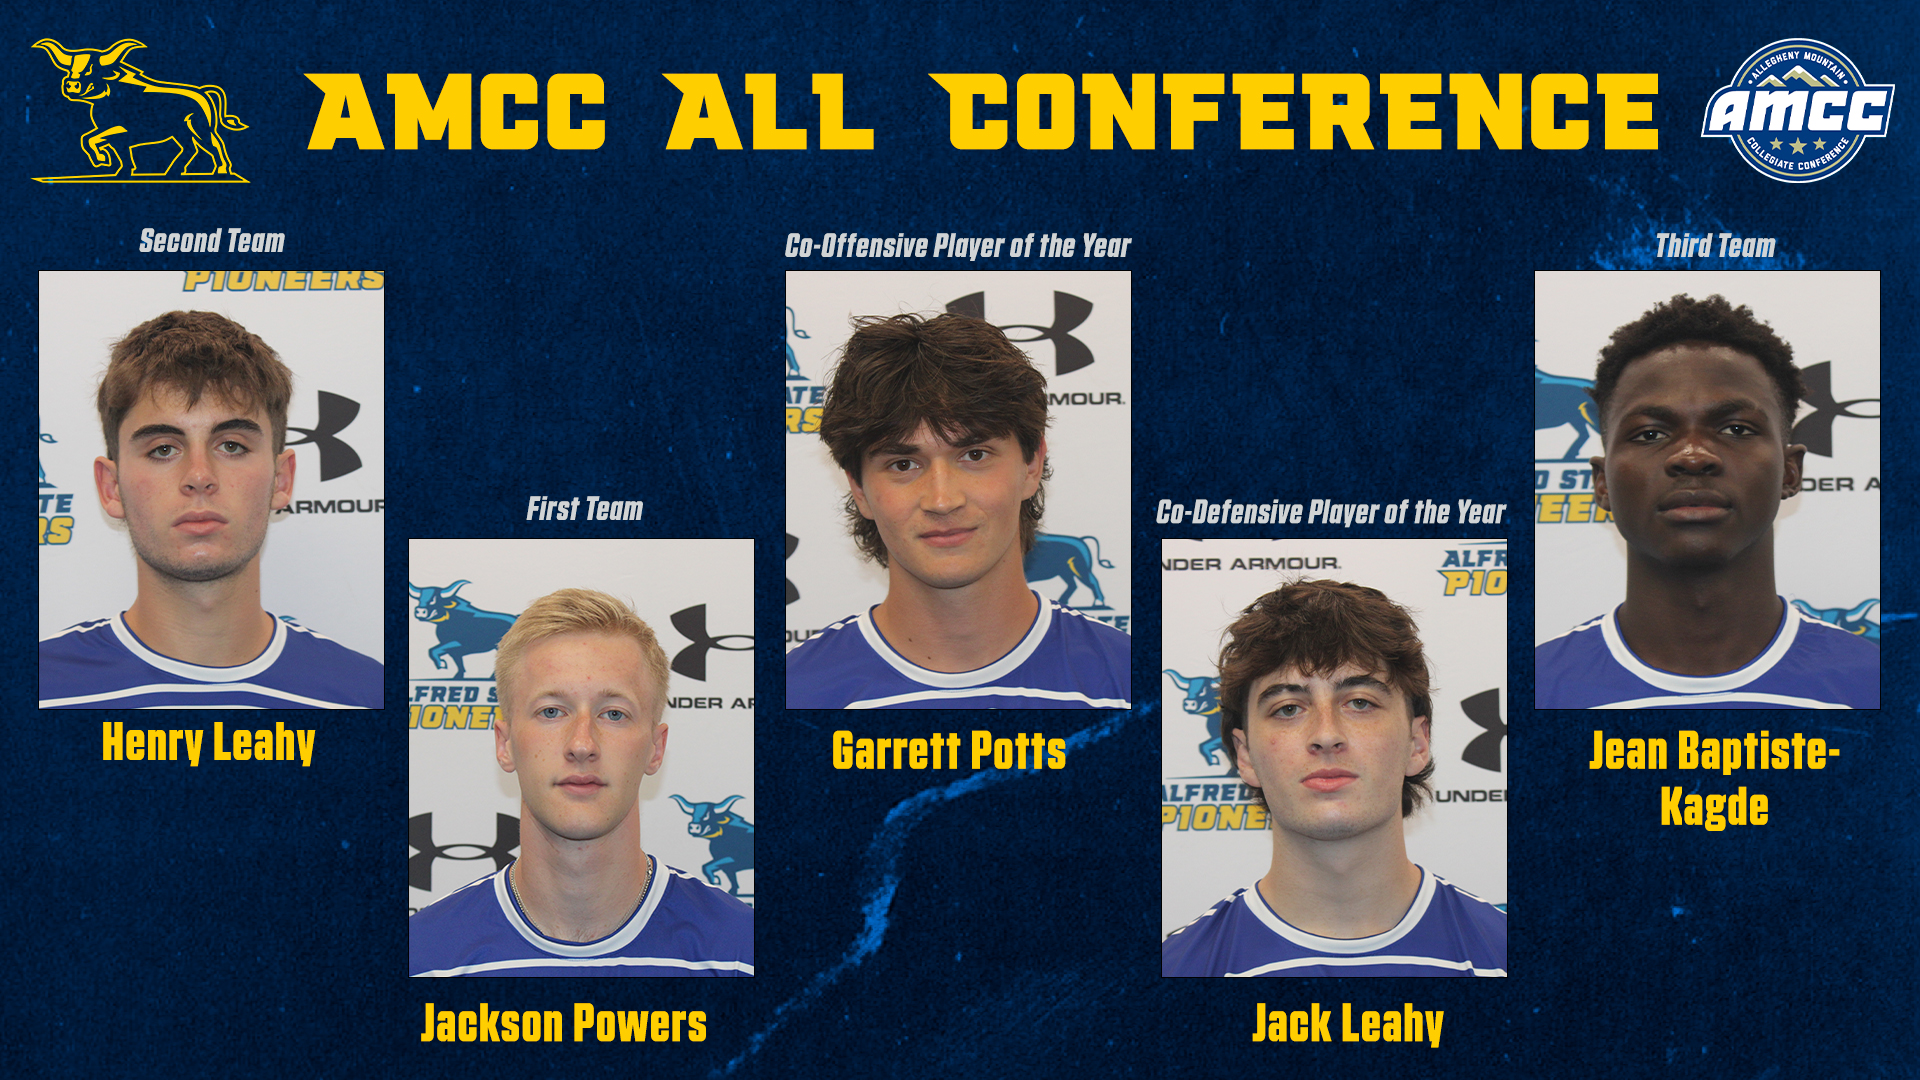 Garrett Potts and Jack Leahy Earns AMCC Player Of The Year Honors